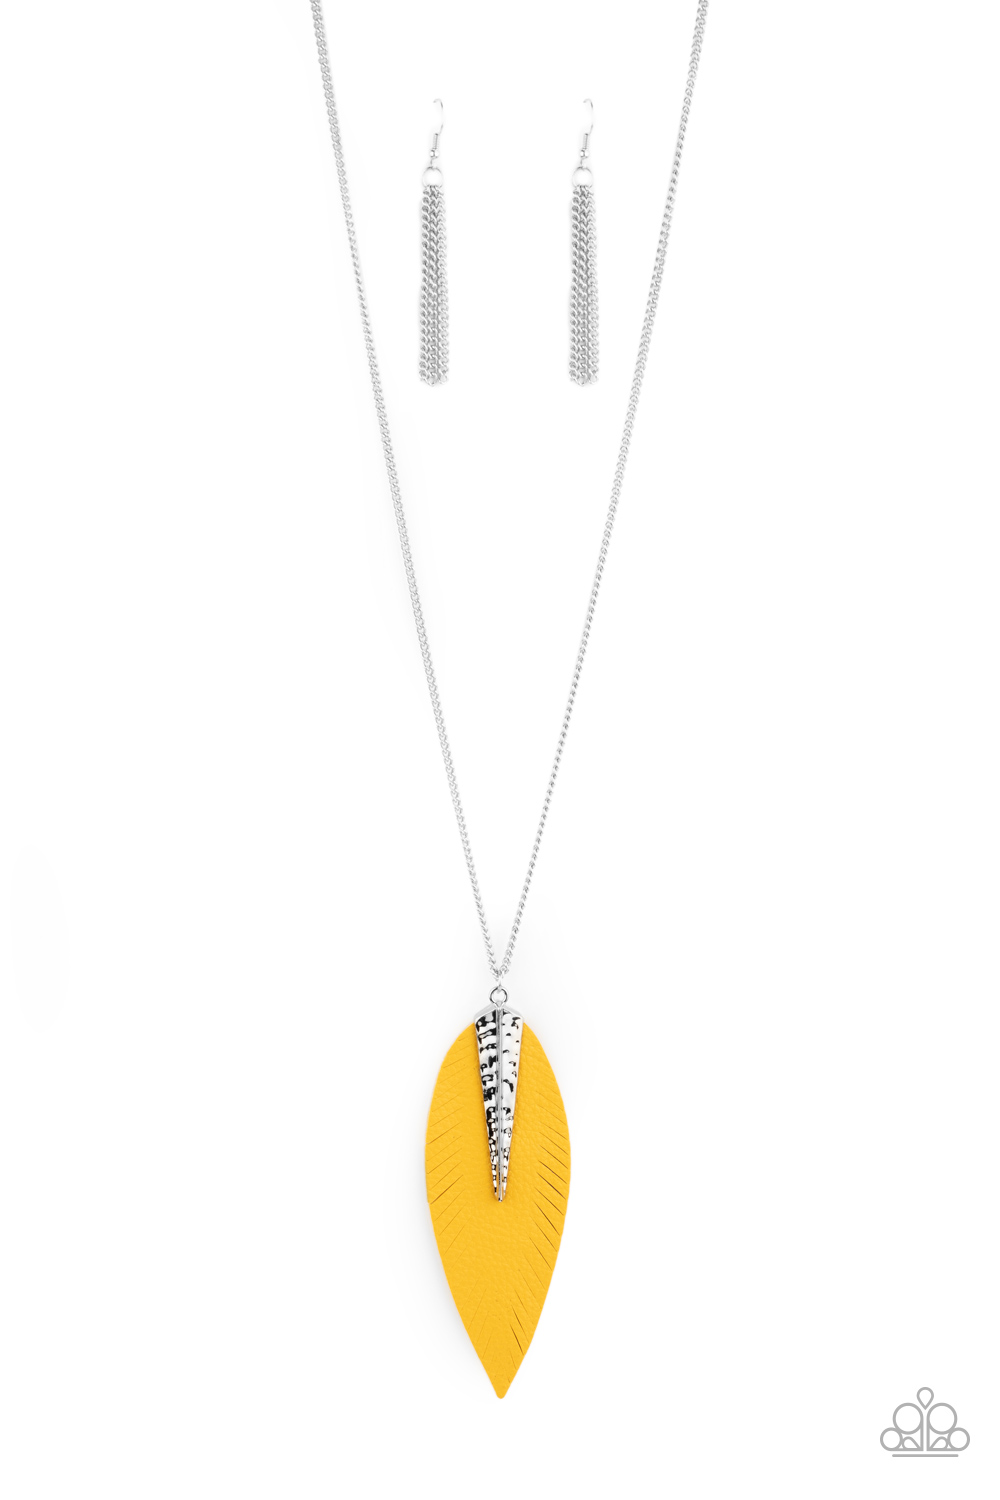 Necklace - Quill Quest - Yellow